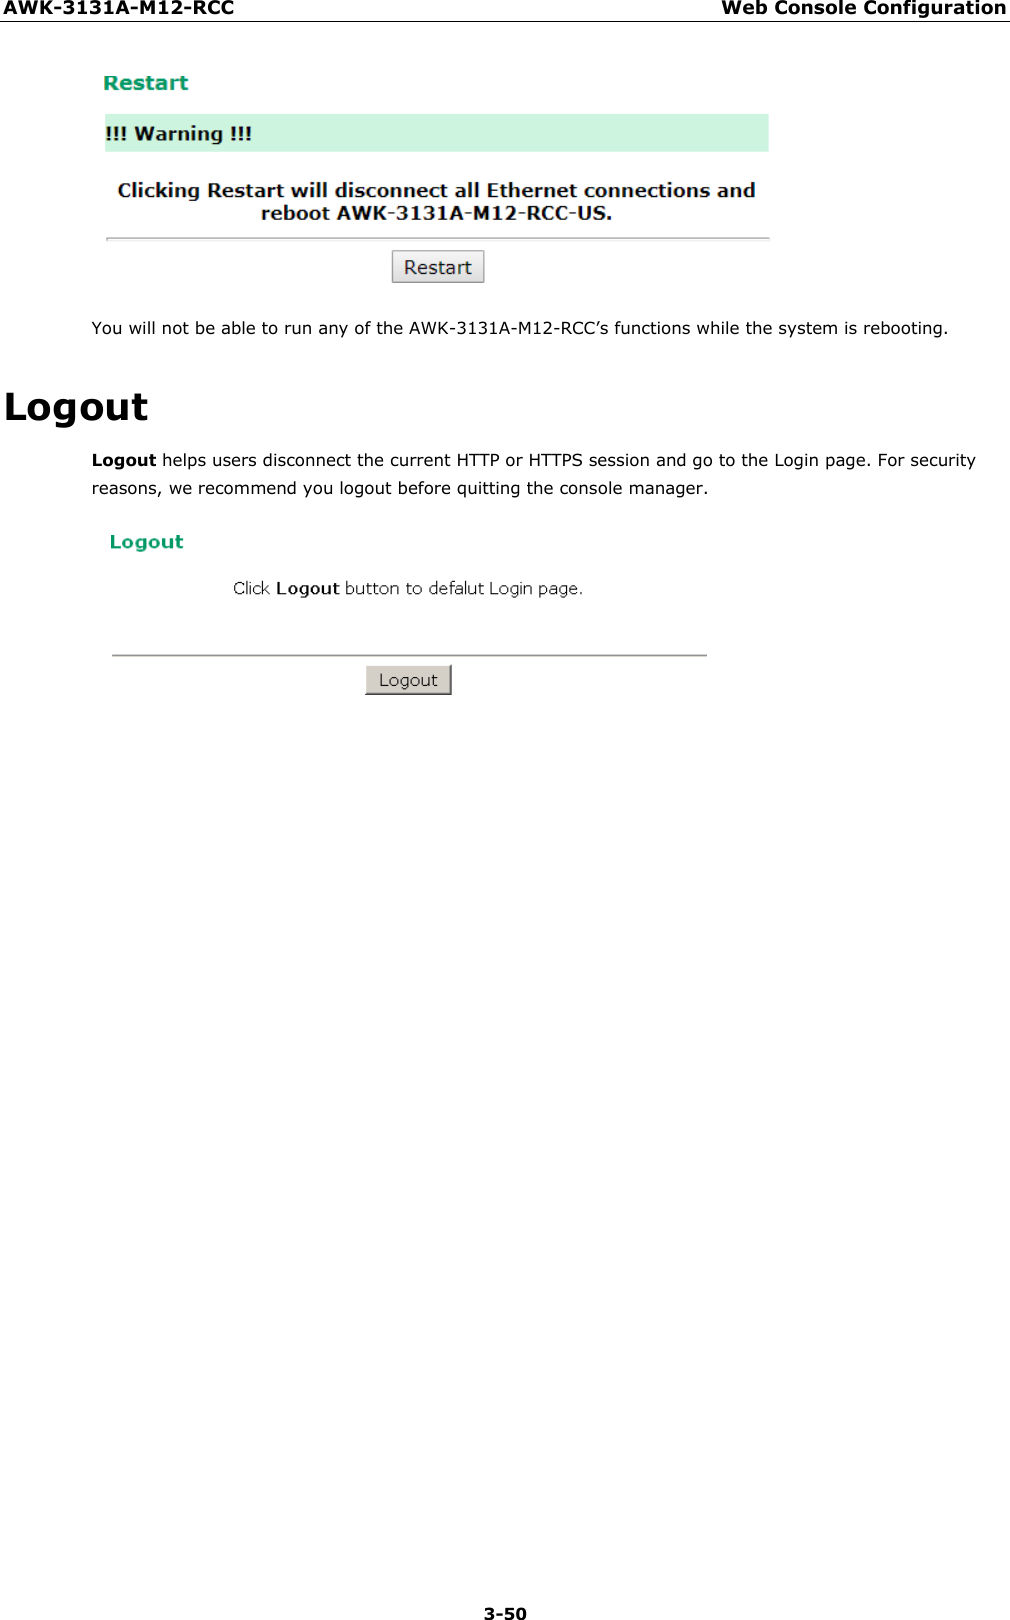 AWK-3131A-M12-RCC Web Console Configuration 3-50       You will not be able to run any of the AWK-3131A-M12-RCC’s functions while the system is rebooting.   Logout Logout helps users disconnect the current HTTP or HTTPS session and go to the Login page. For security reasons, we recommend you logout before quitting the console manager.  